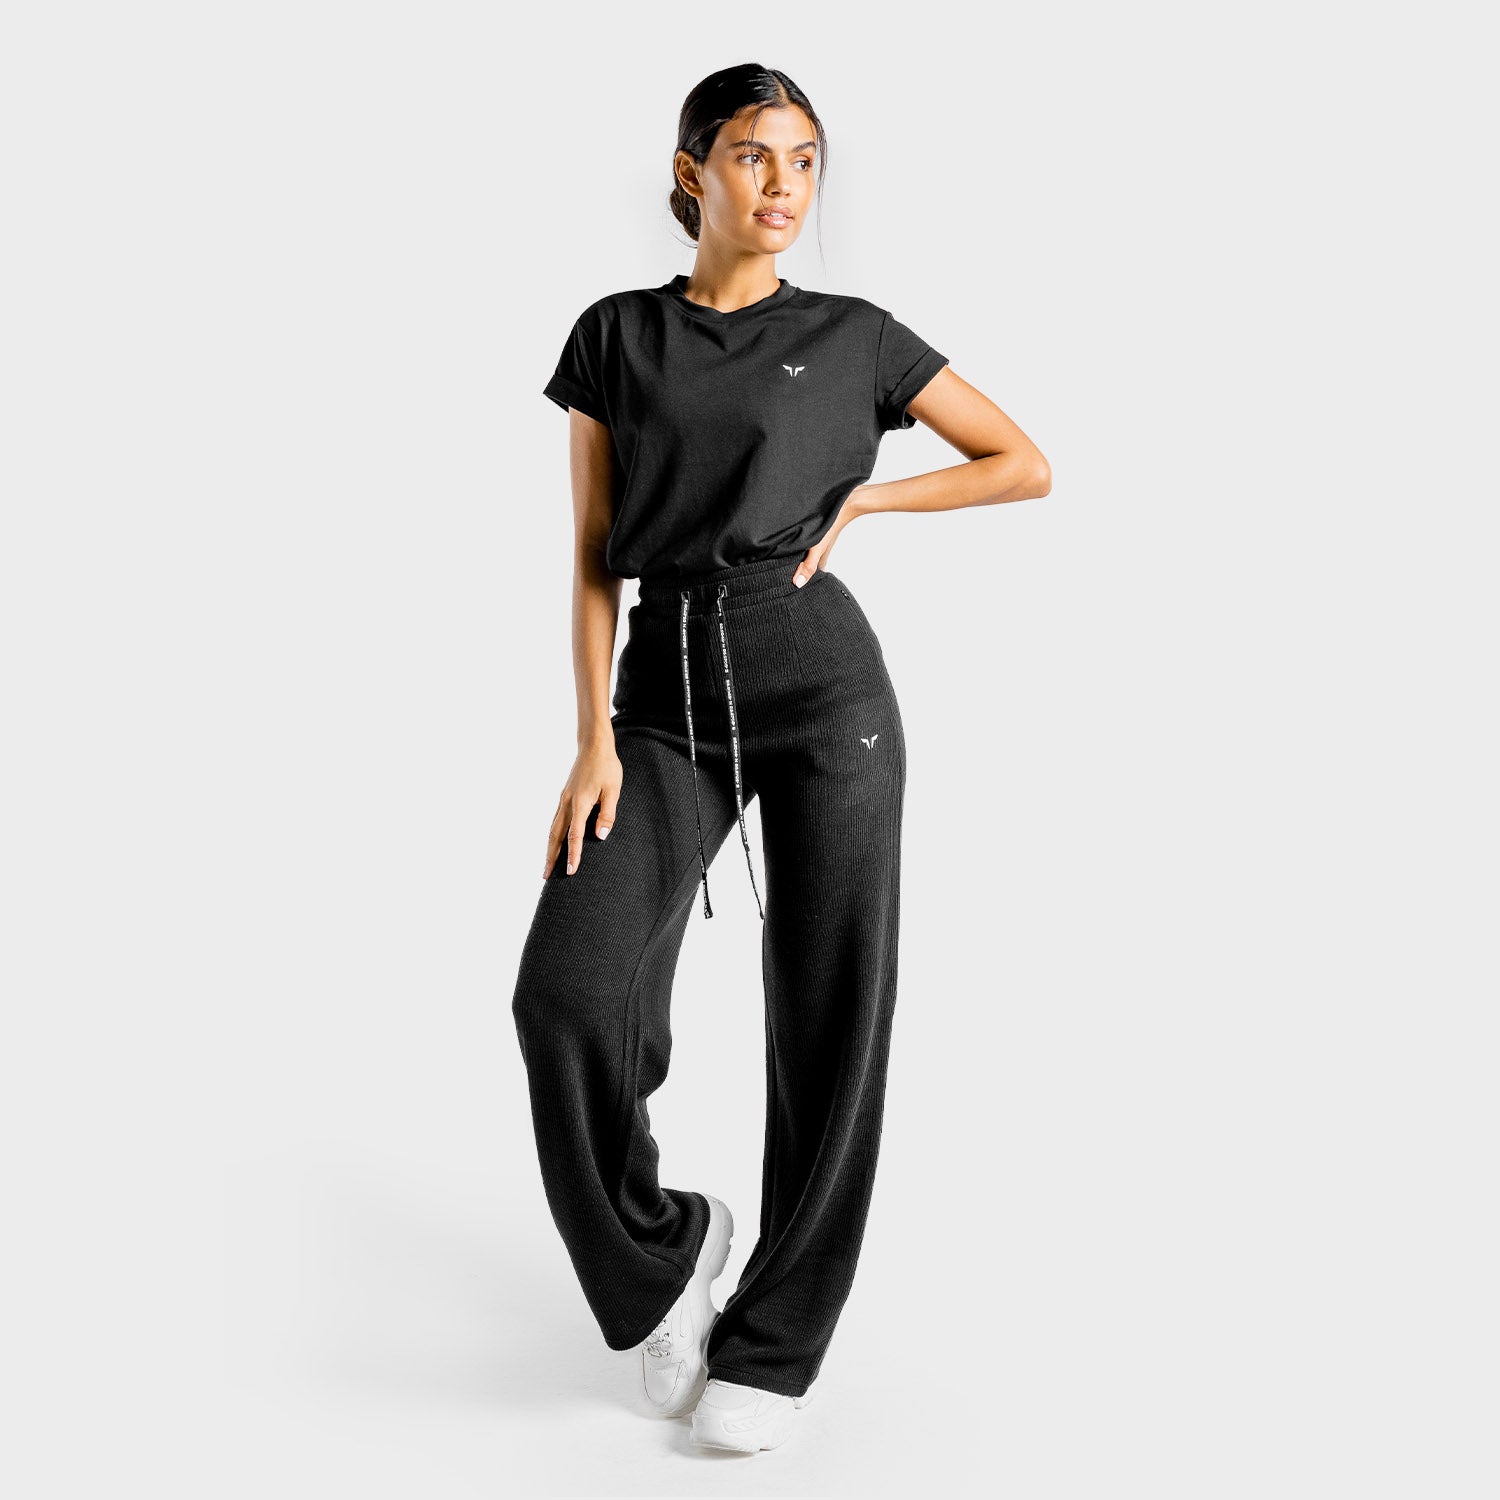 Gym & Training Black Exercise Pants for Women for sale